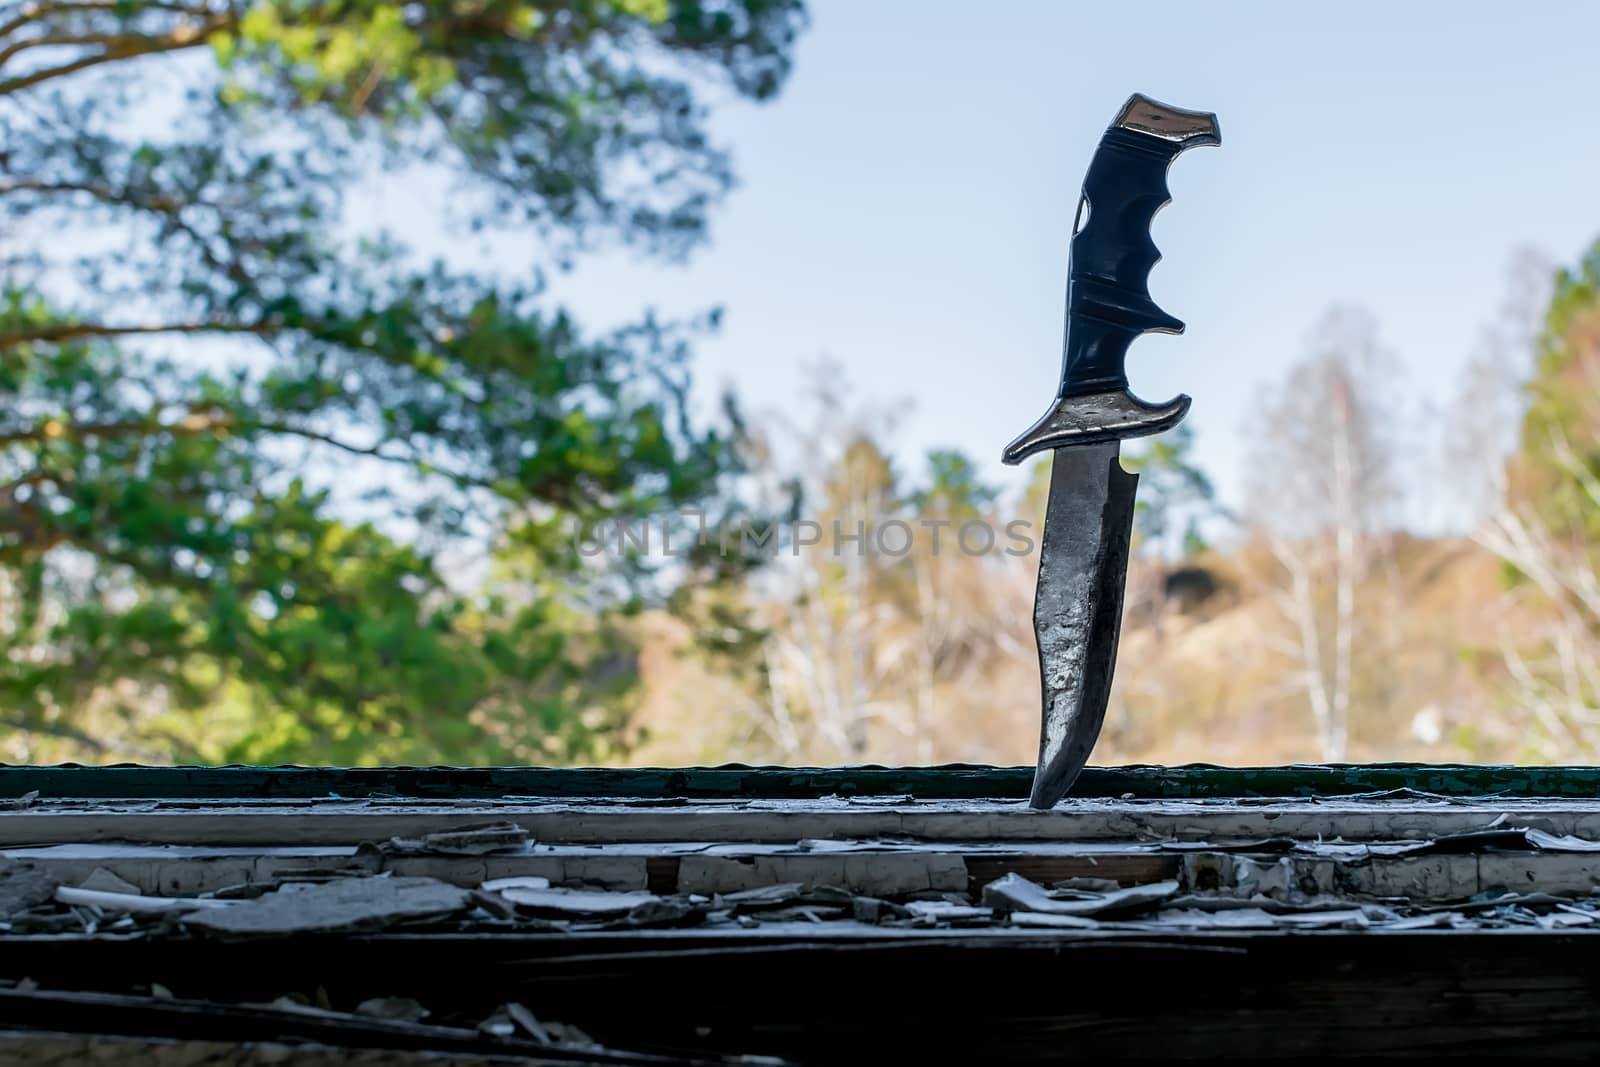 a terrible old combat knife stuck in the ruined window sill by jk3030